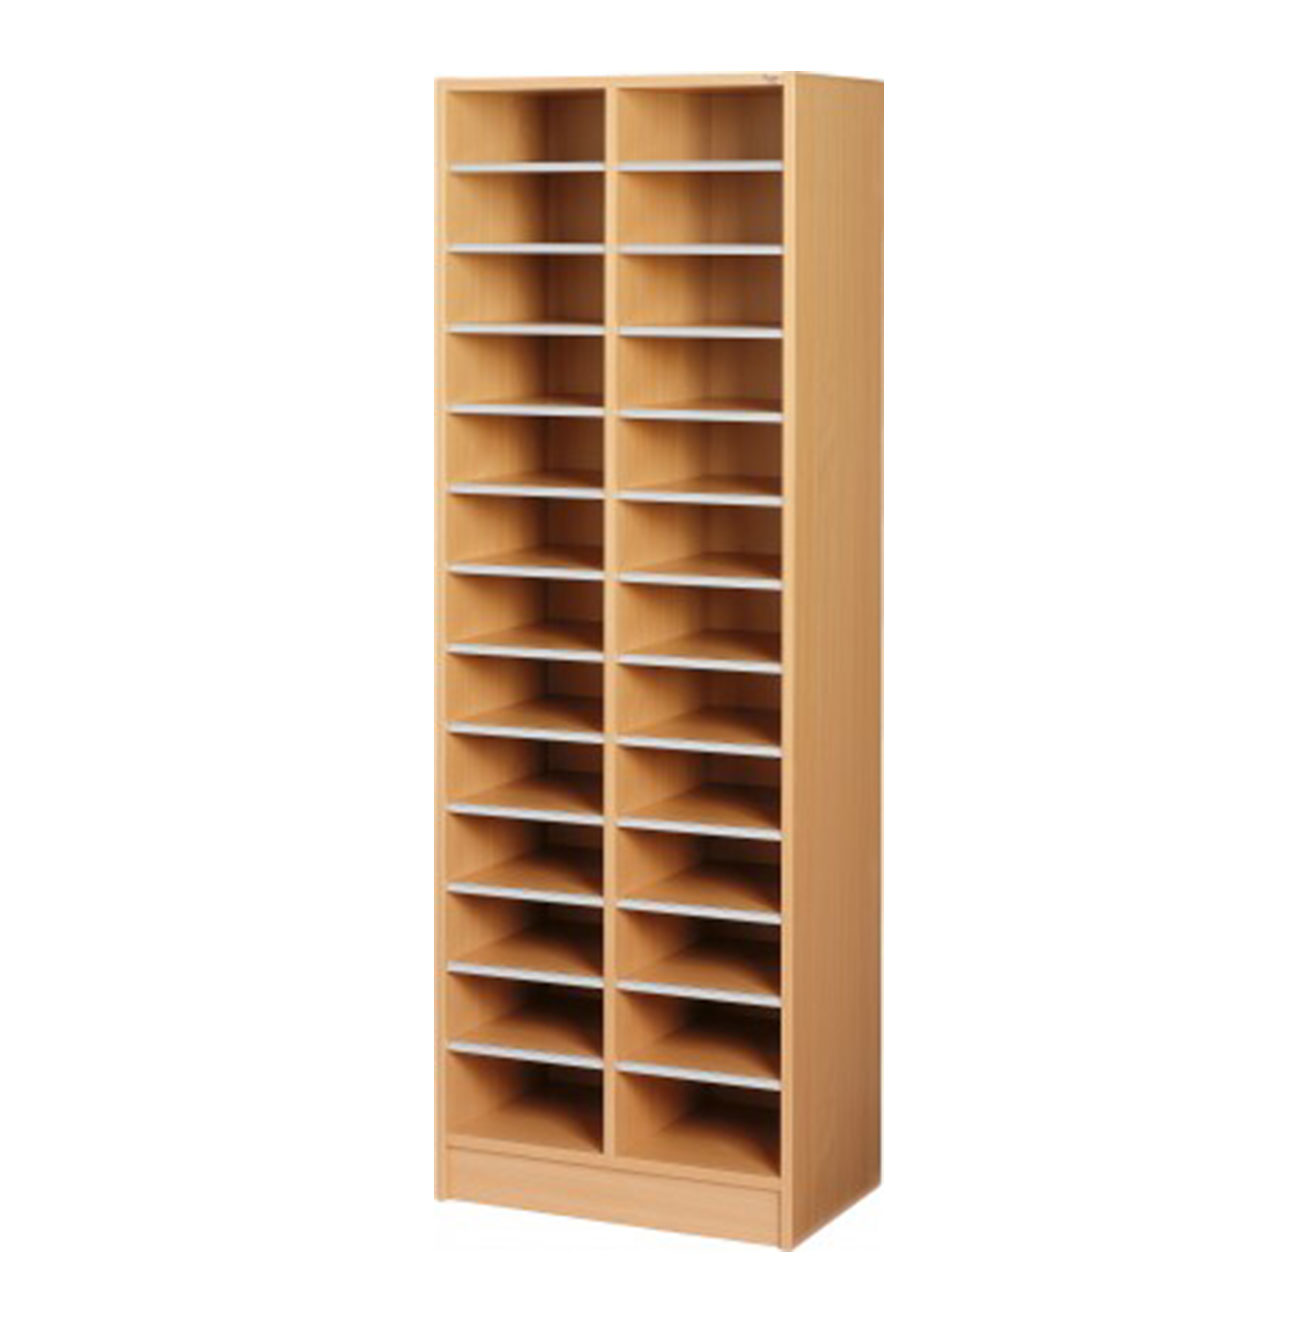 Double Pigeon Hole Cabinet - Beech